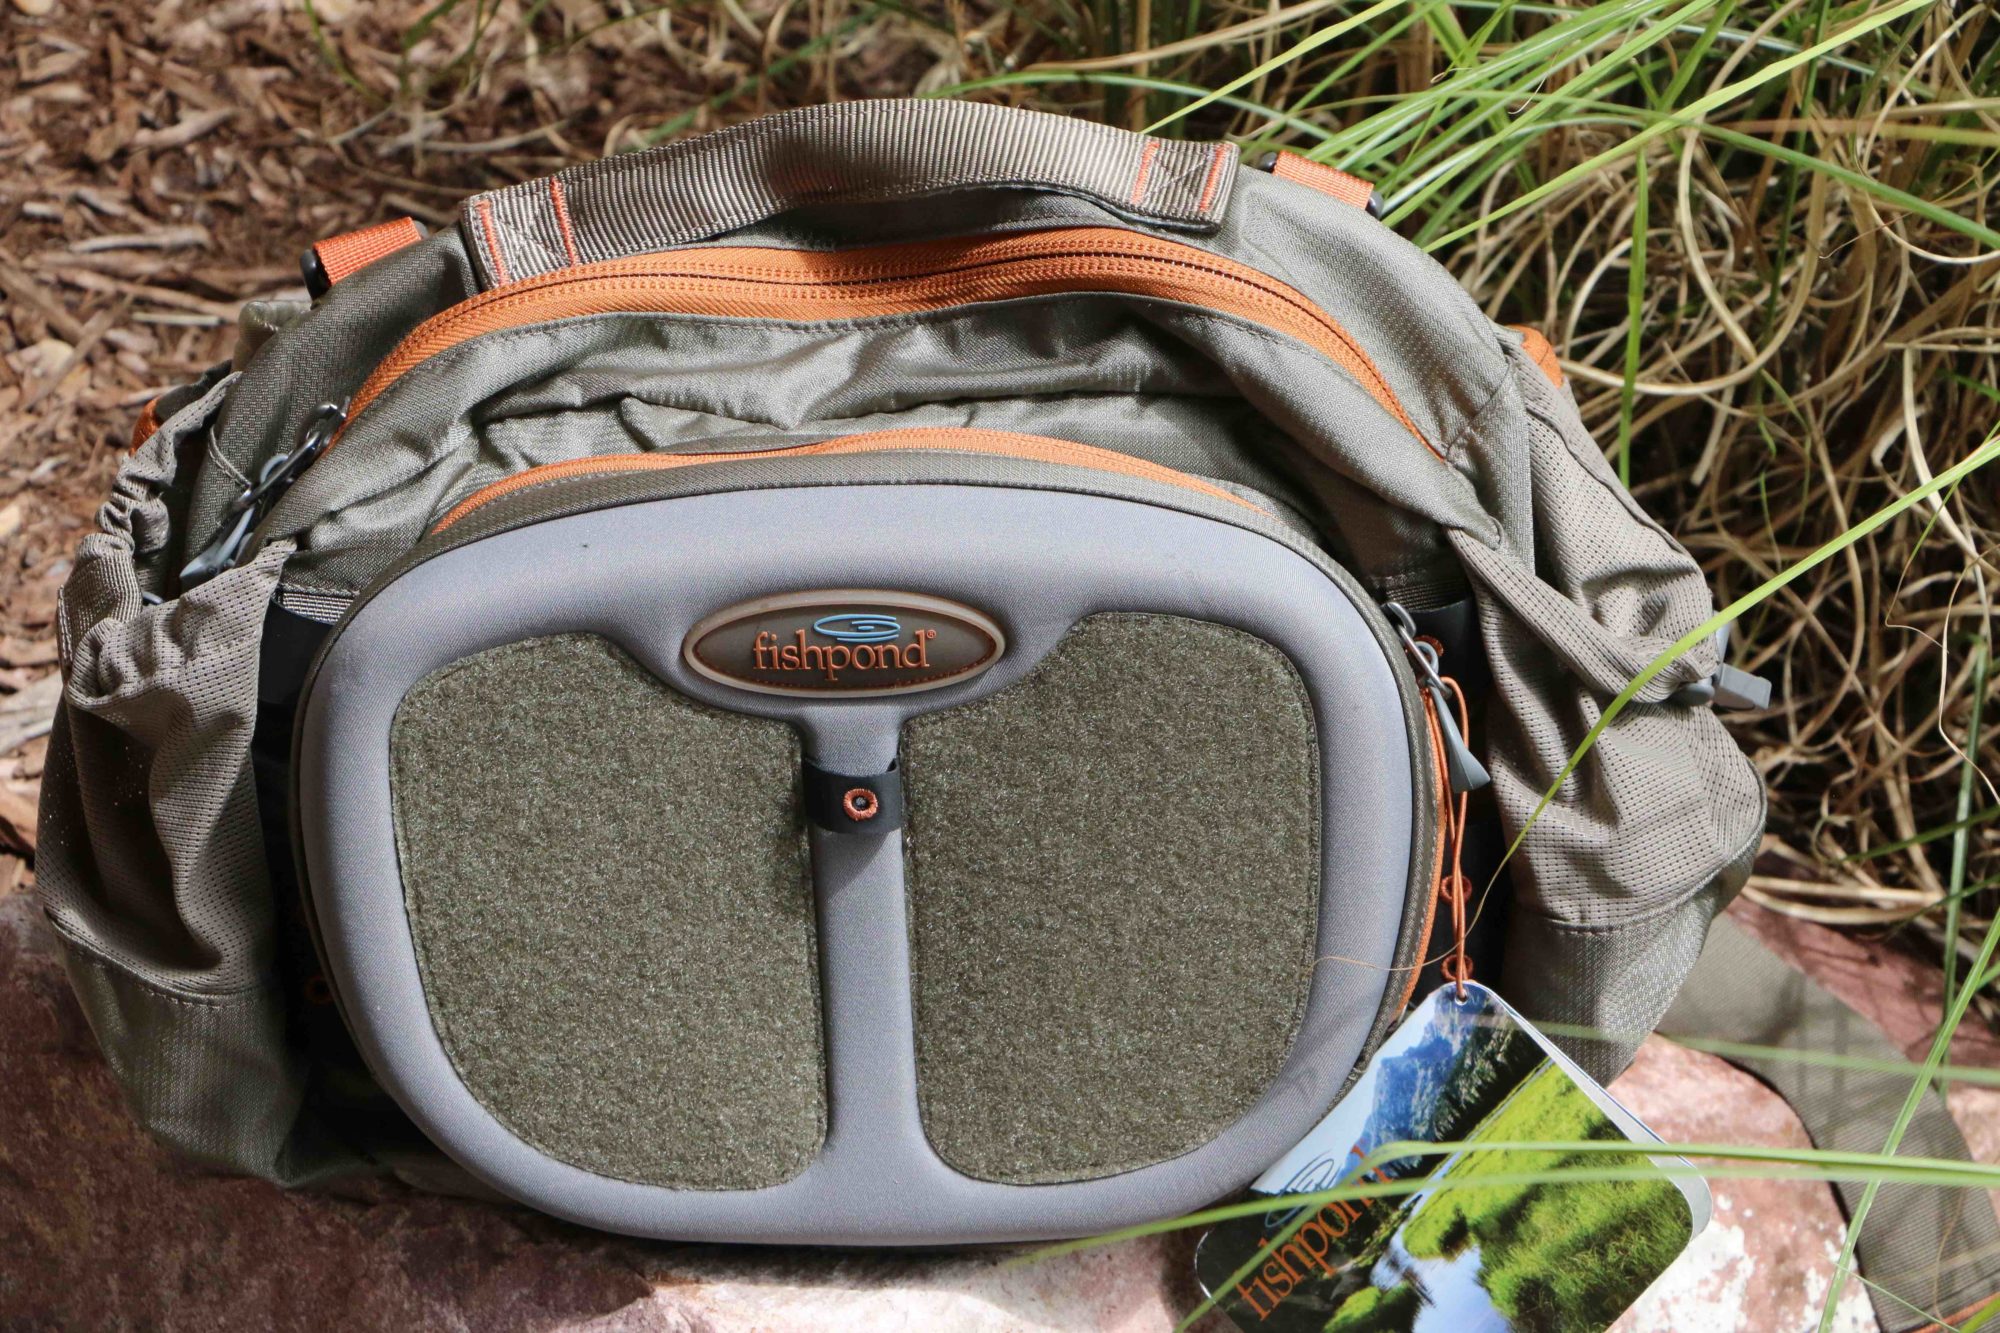 ORVIS SLING PACK MID SIZE REVIEW - WATCH BEFORE YOU